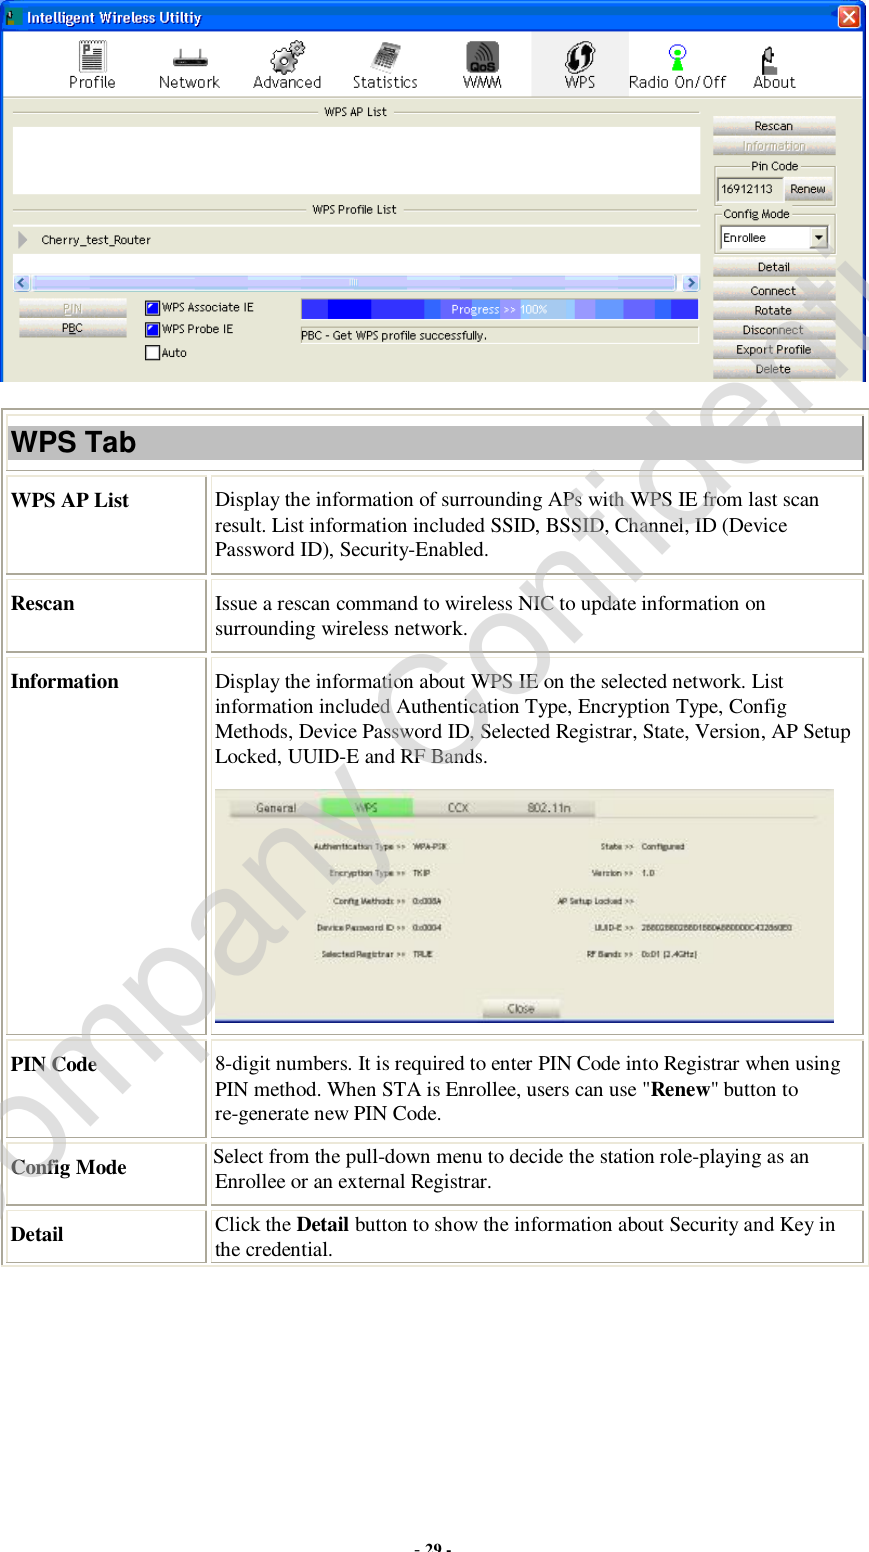  - 29 -  WPS Tab WPS AP List  Display the information of surrounding APs with WPS IE from last scan result. List information included SSID, BSSID, Channel, ID (Device Password ID), Security-Enabled. Rescan  Issue a rescan command to wireless NIC to update information on surrounding wireless network. Information  Display the information about WPS IE on the selected network. List information included Authentication Type, Encryption Type, Config Methods, Device Password ID, Selected Registrar, State, Version, AP Setup Locked, UUID-E and RF Bands.  PIN Code  8-digit numbers. It is required to enter PIN Code into Registrar when using PIN method. When STA is Enrollee, users can use &quot;Renew&quot; button to re-generate new PIN Code. Config Mode  Select from the pull-down menu to decide the station role-playing as an Enrollee or an external Registrar. Detail  Click the Detail button to show the information about Security and Key in the credential. Company Confidential